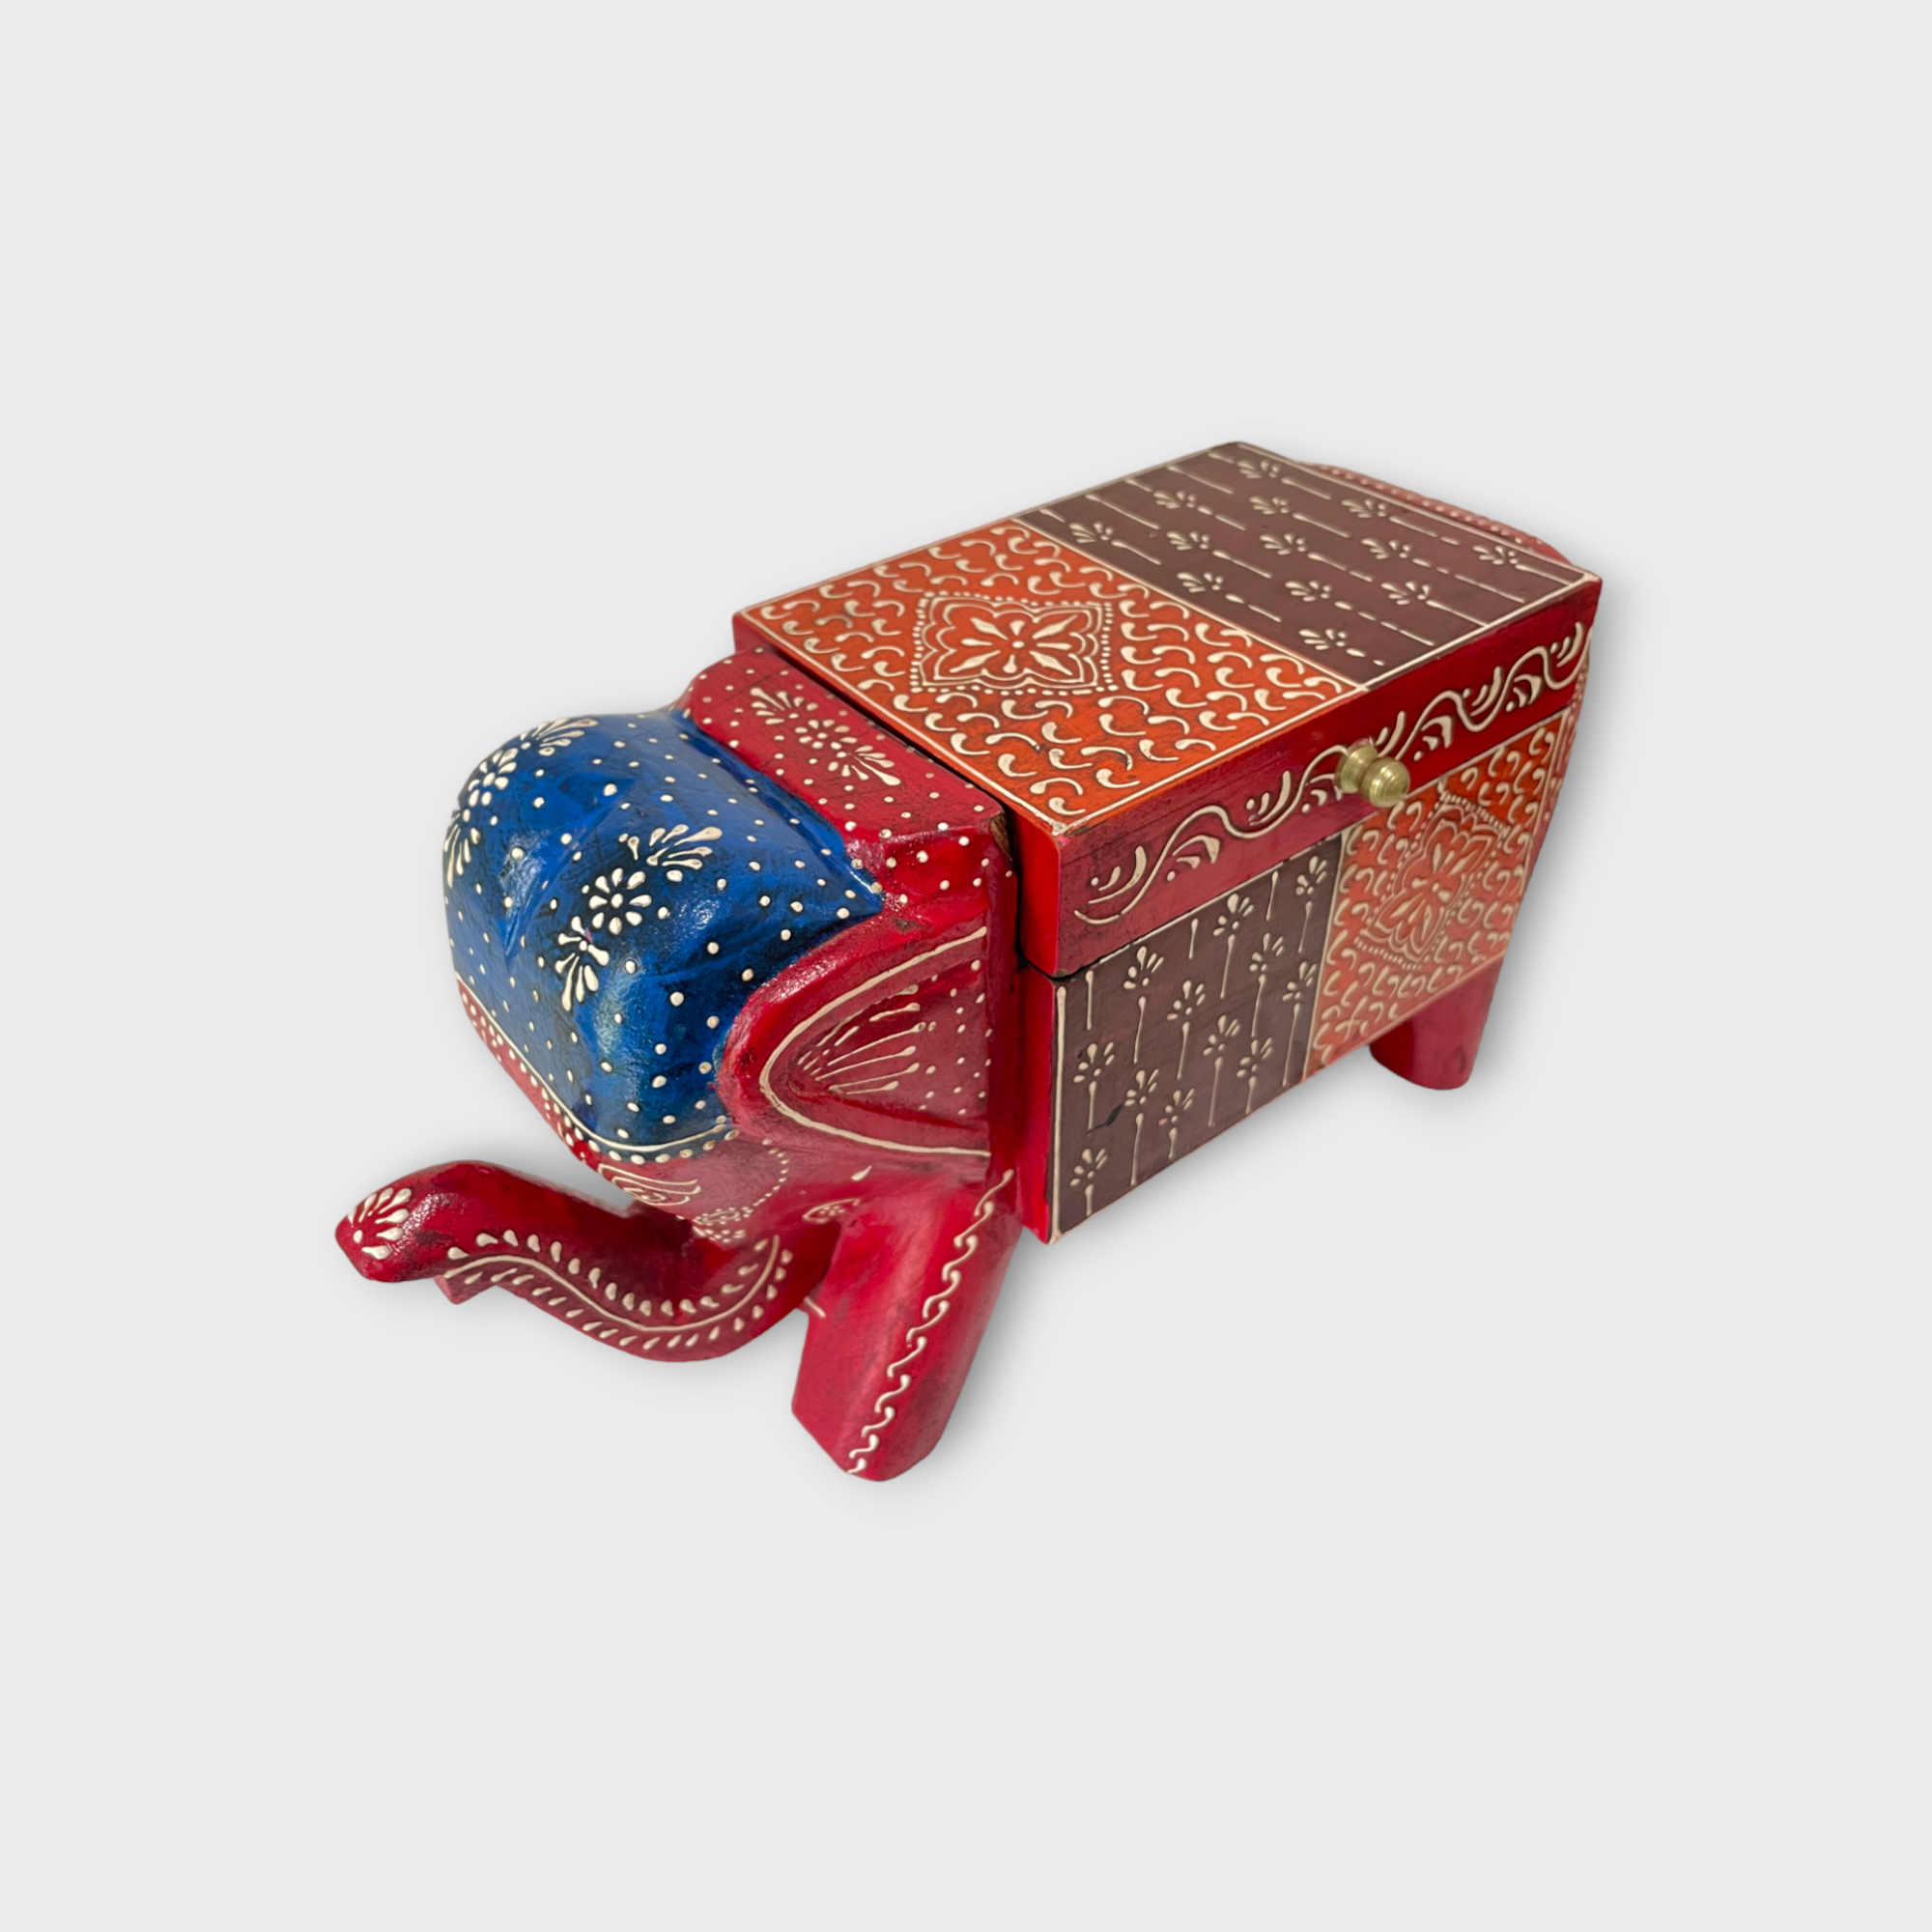 Wooden Elephant Jewelry Box from India